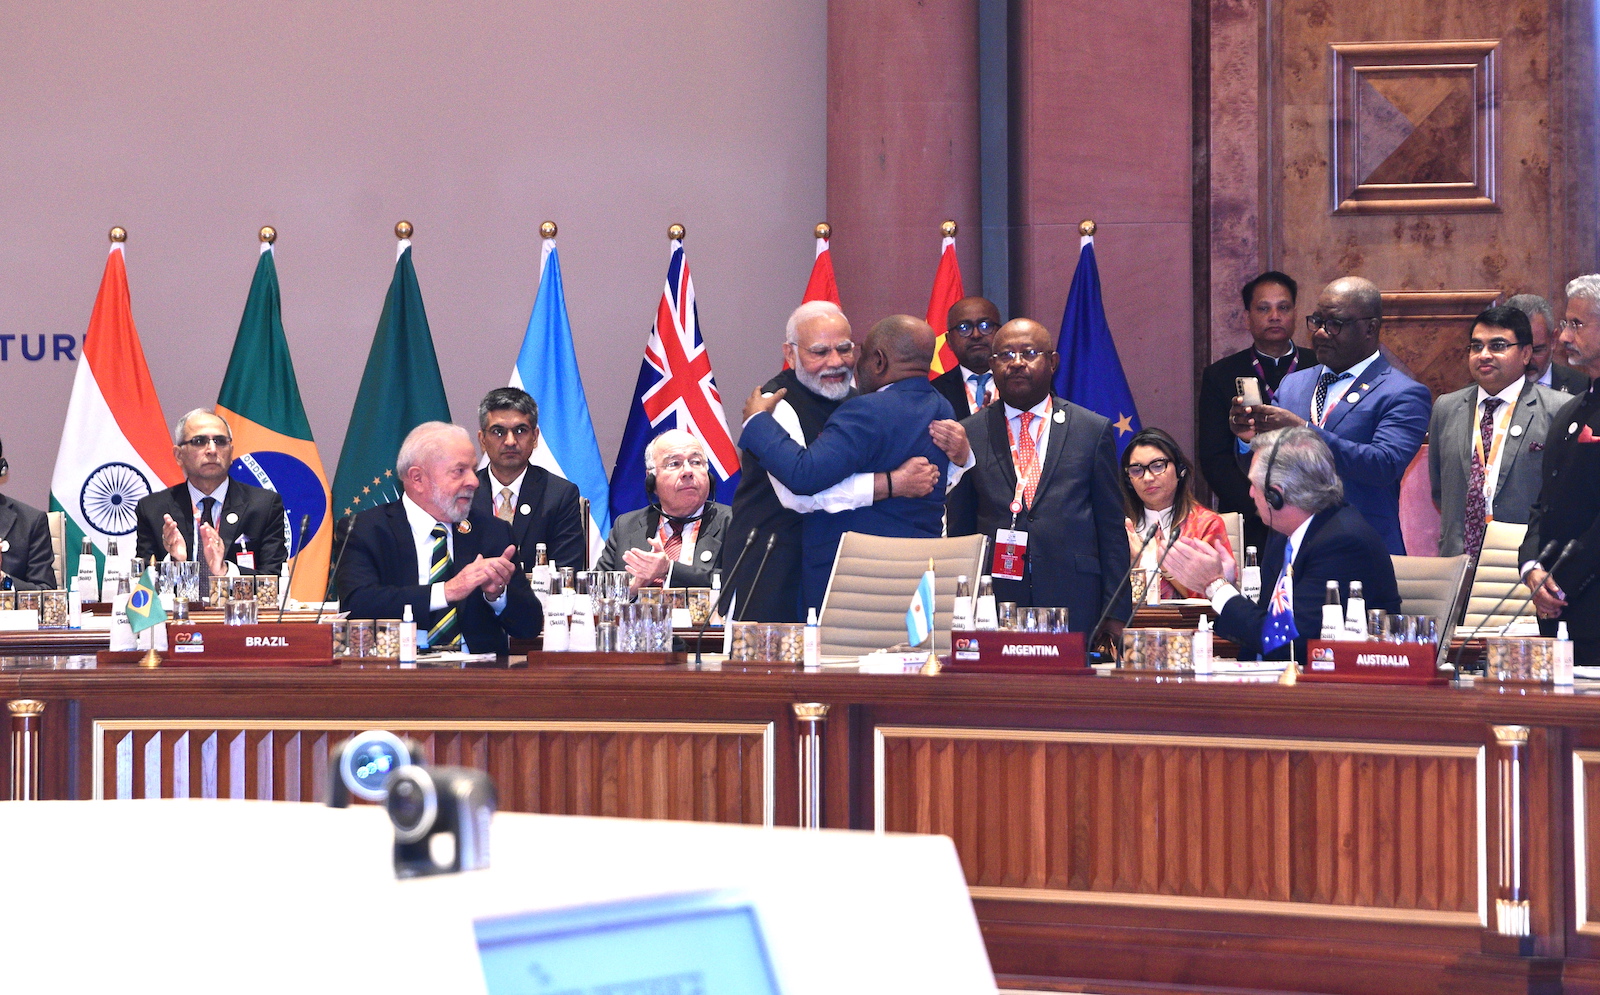 epa10849946 A handout photo made available by the Ministry of External Affairs (MEA) of India shows Indian Prime Minister Narendra Modi (C-L) embracing President of the Union of Comoros and Chairperson of the African Union Azali Assoumani (C-R) during the G20 Summit at ITPO Convention Centre Pragati Maidan in New Delhi, India, 09 September 2023. The G20 Heads of State and Government summit takes place in the Indian capital on 09 and 10 September.  EPA/INDIAN MINISTRY OF EXTERNAL AFFAIRS / HANDOUT  HANDOUT EDITORIAL USE ONLY/NO SALES